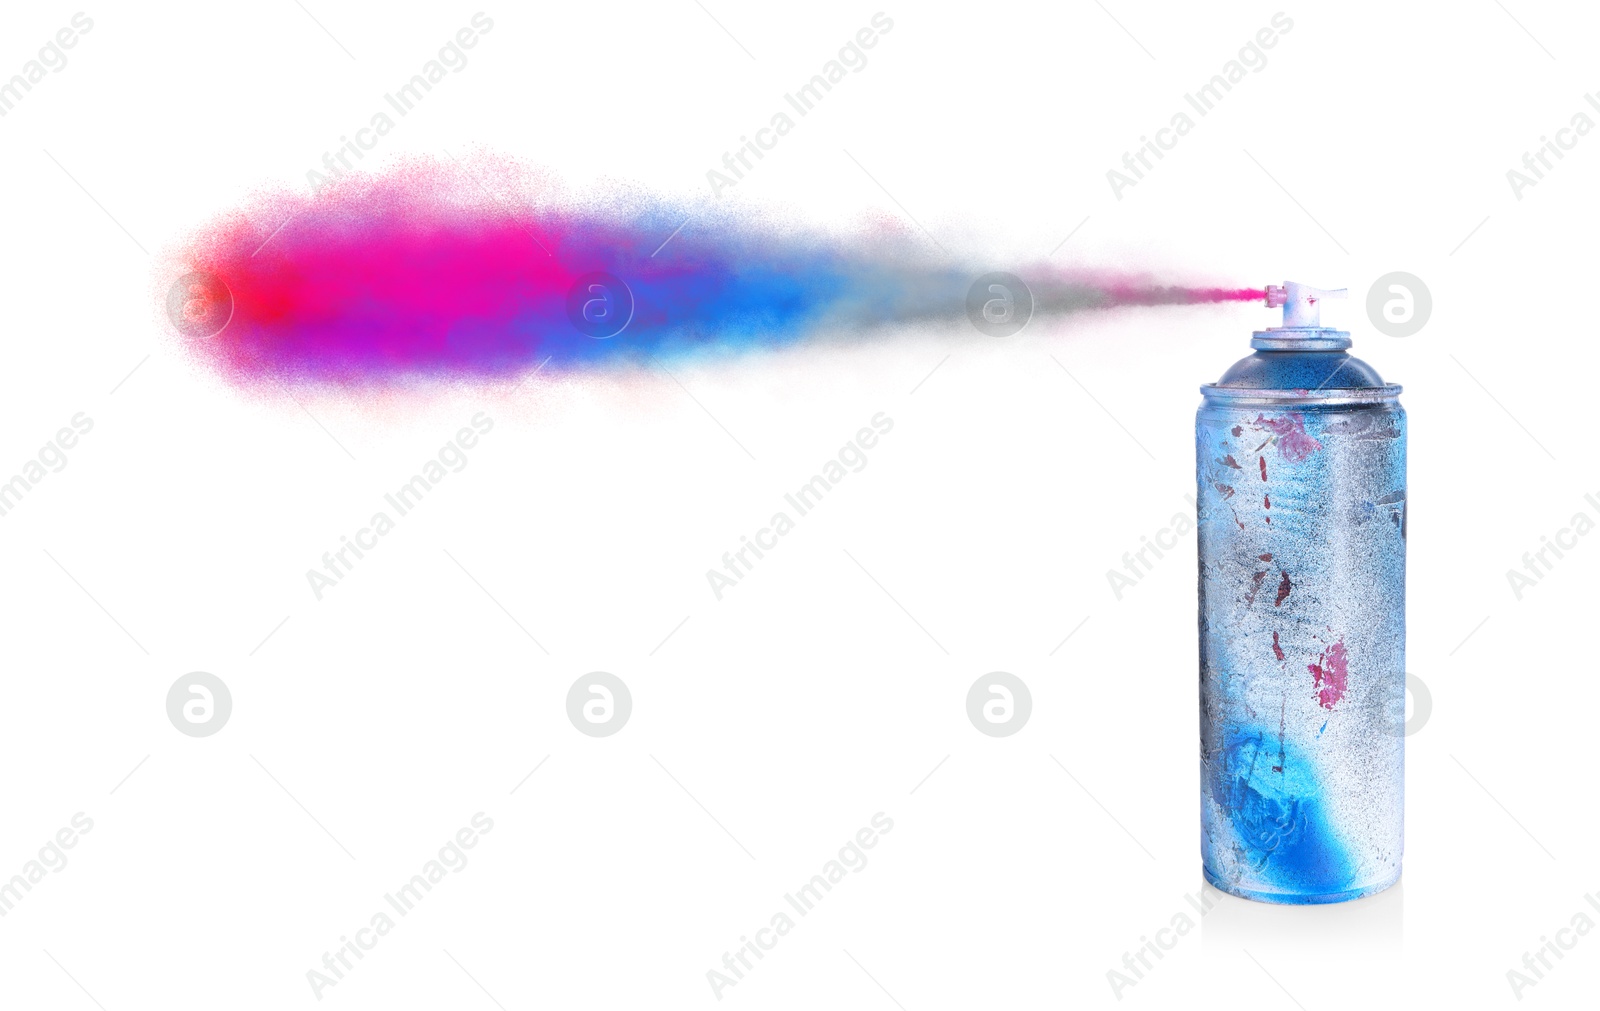 Image of Aerosol can spraying colorful paint isolated on white